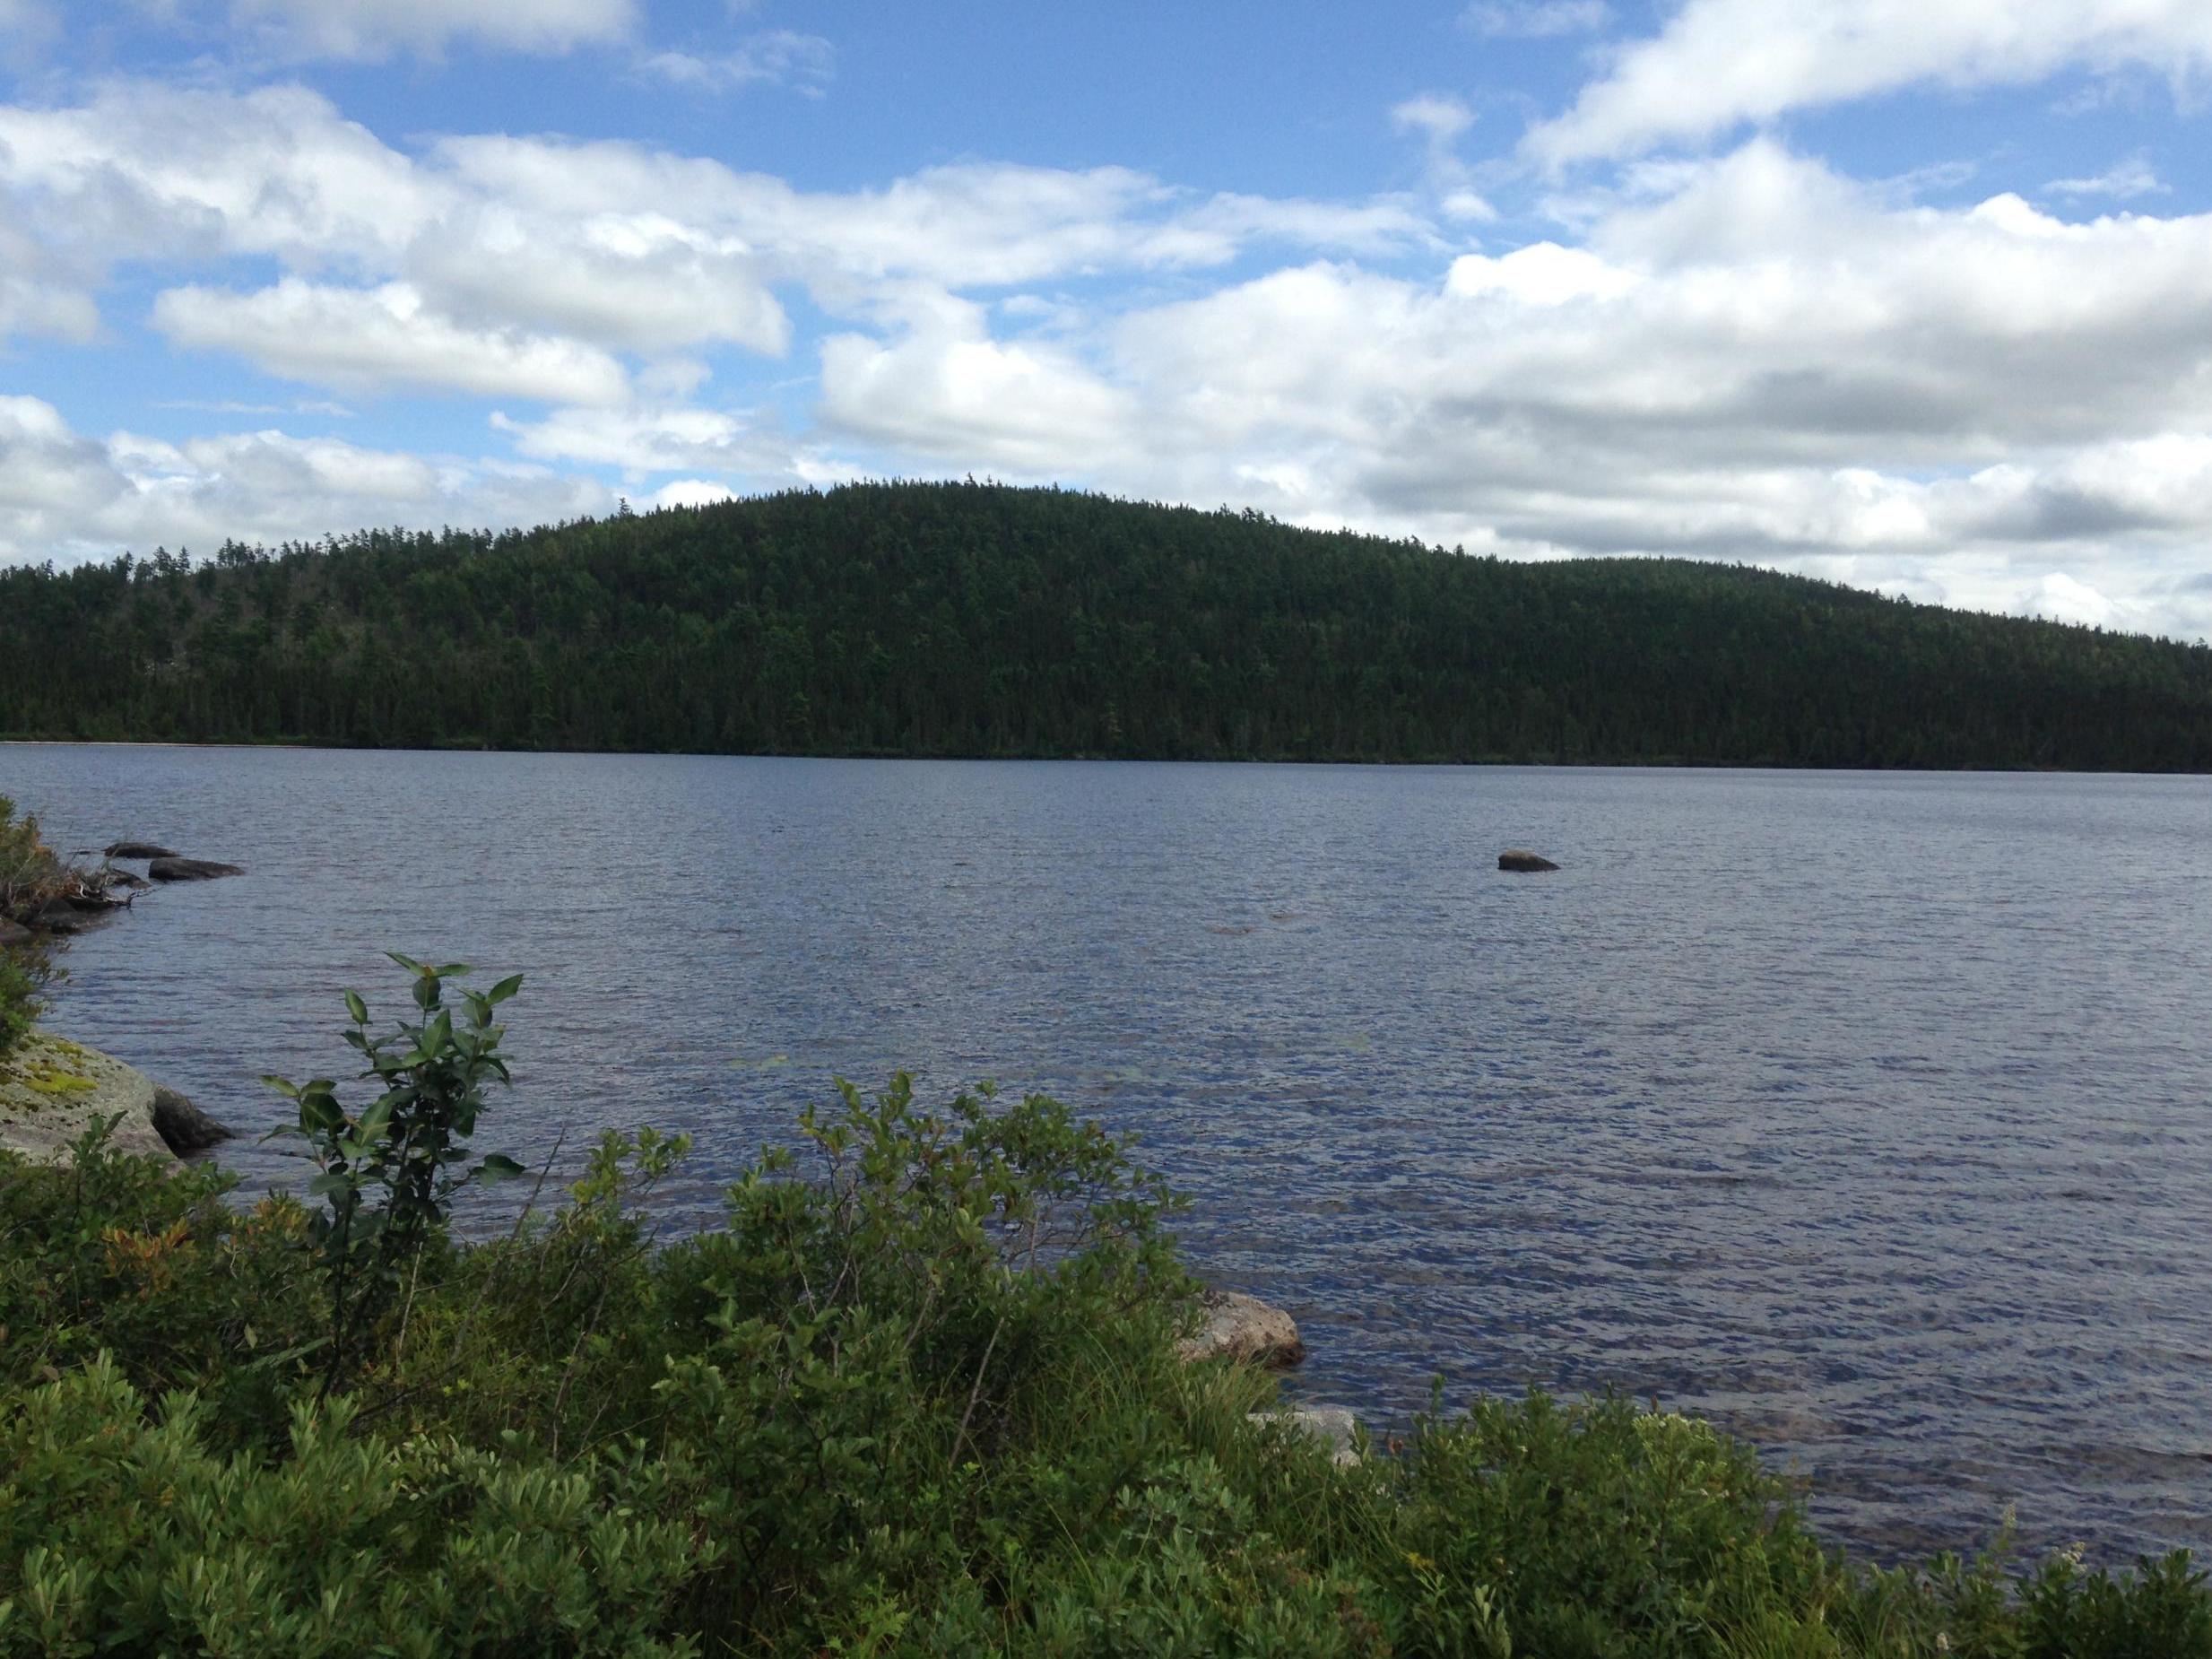 Scientists studied sediments at the bottom of five remote lakes in north-central New Brunswick